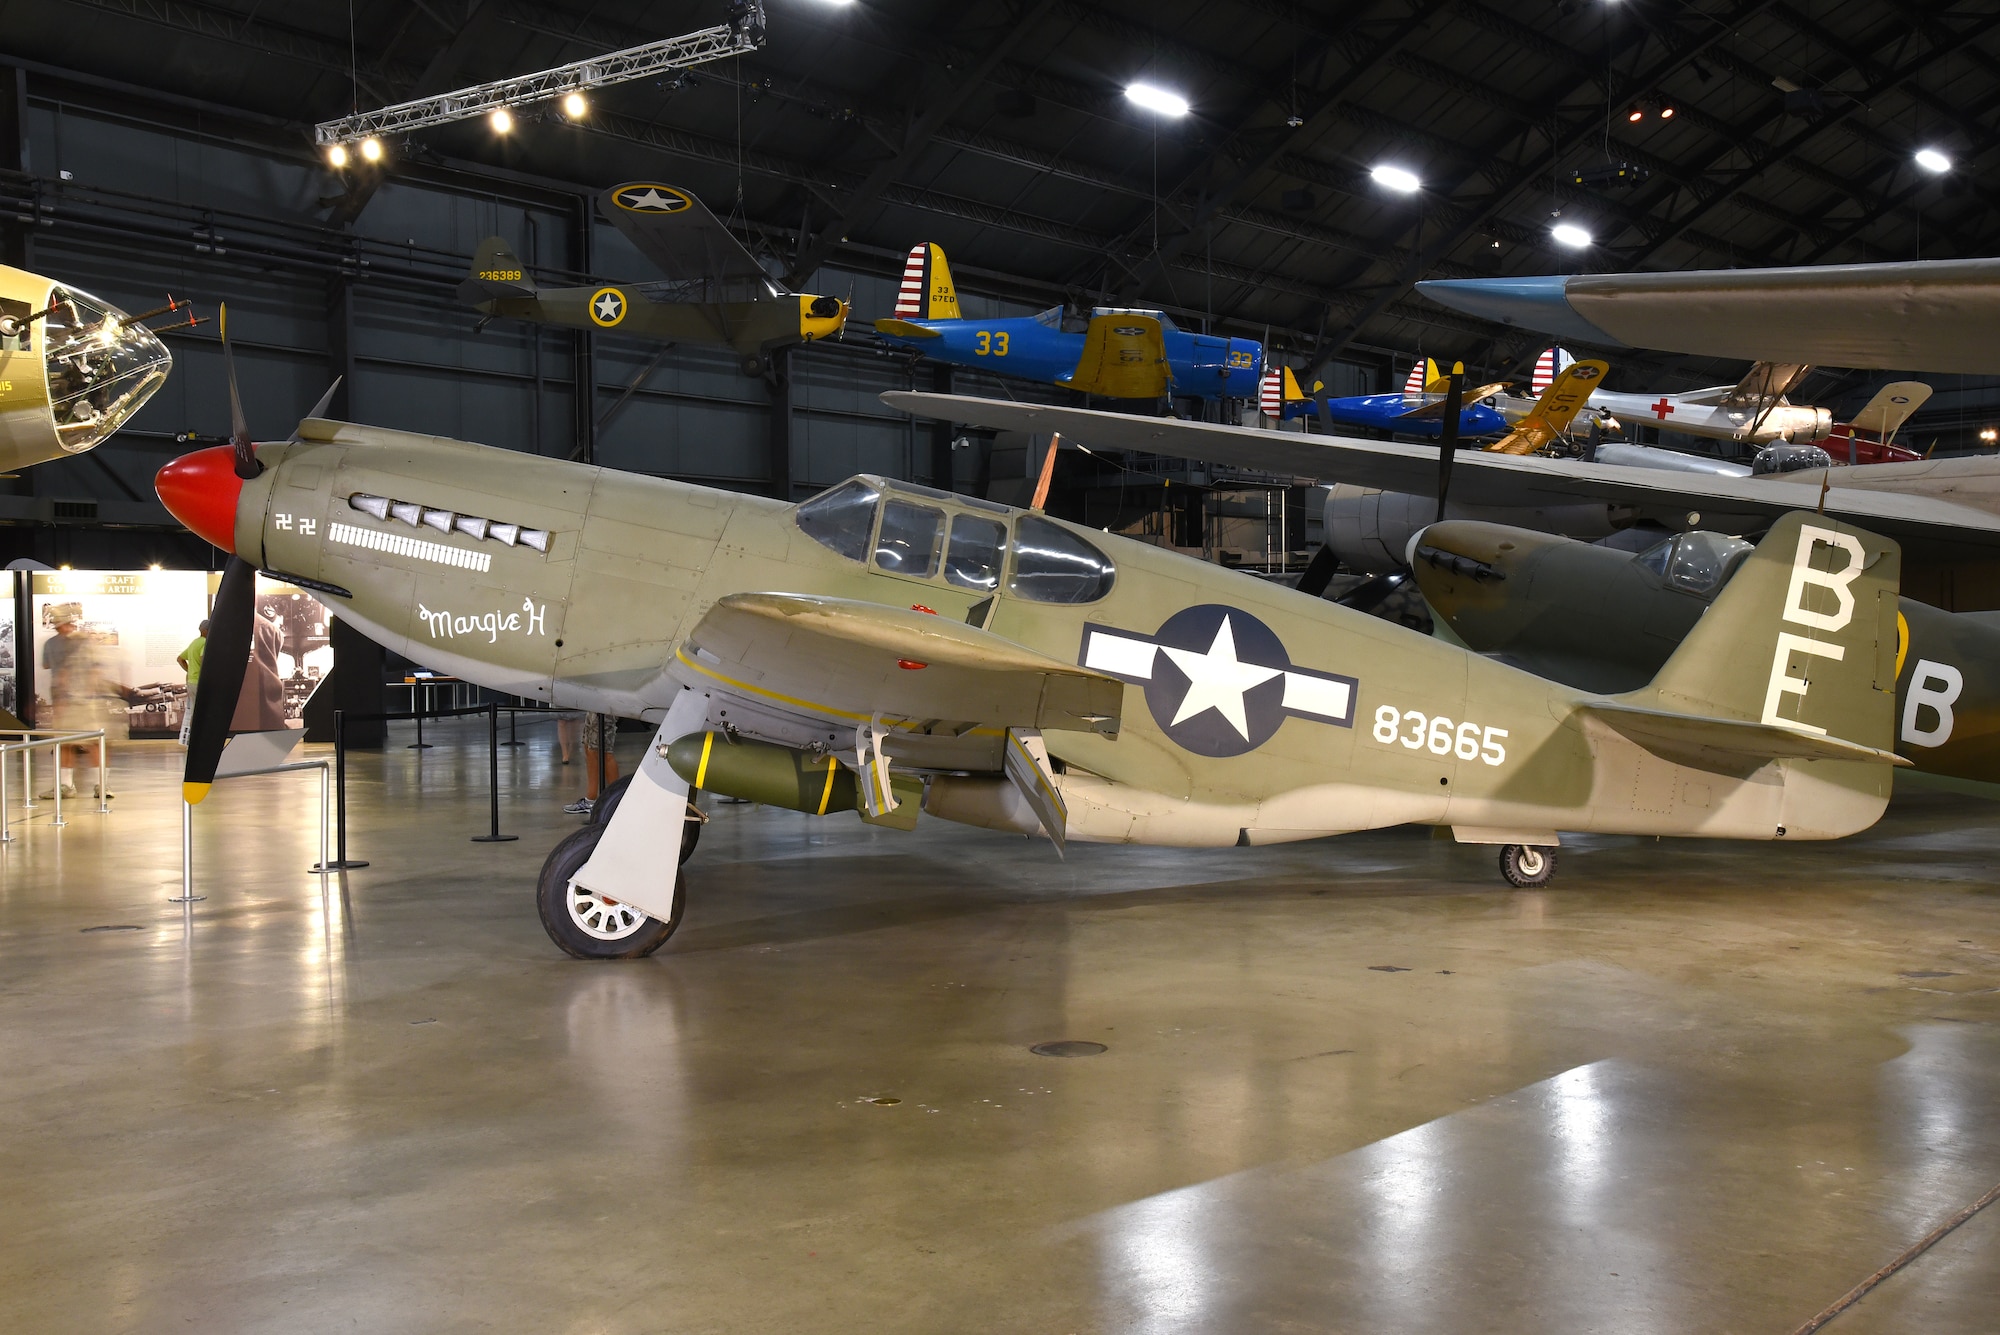 DAYTON, Ohio -- North American A-36A Mustang in the WWII Gallery at the National Museum of the United States Air Force. (U.S. Air Force photo by Ken LaRock)